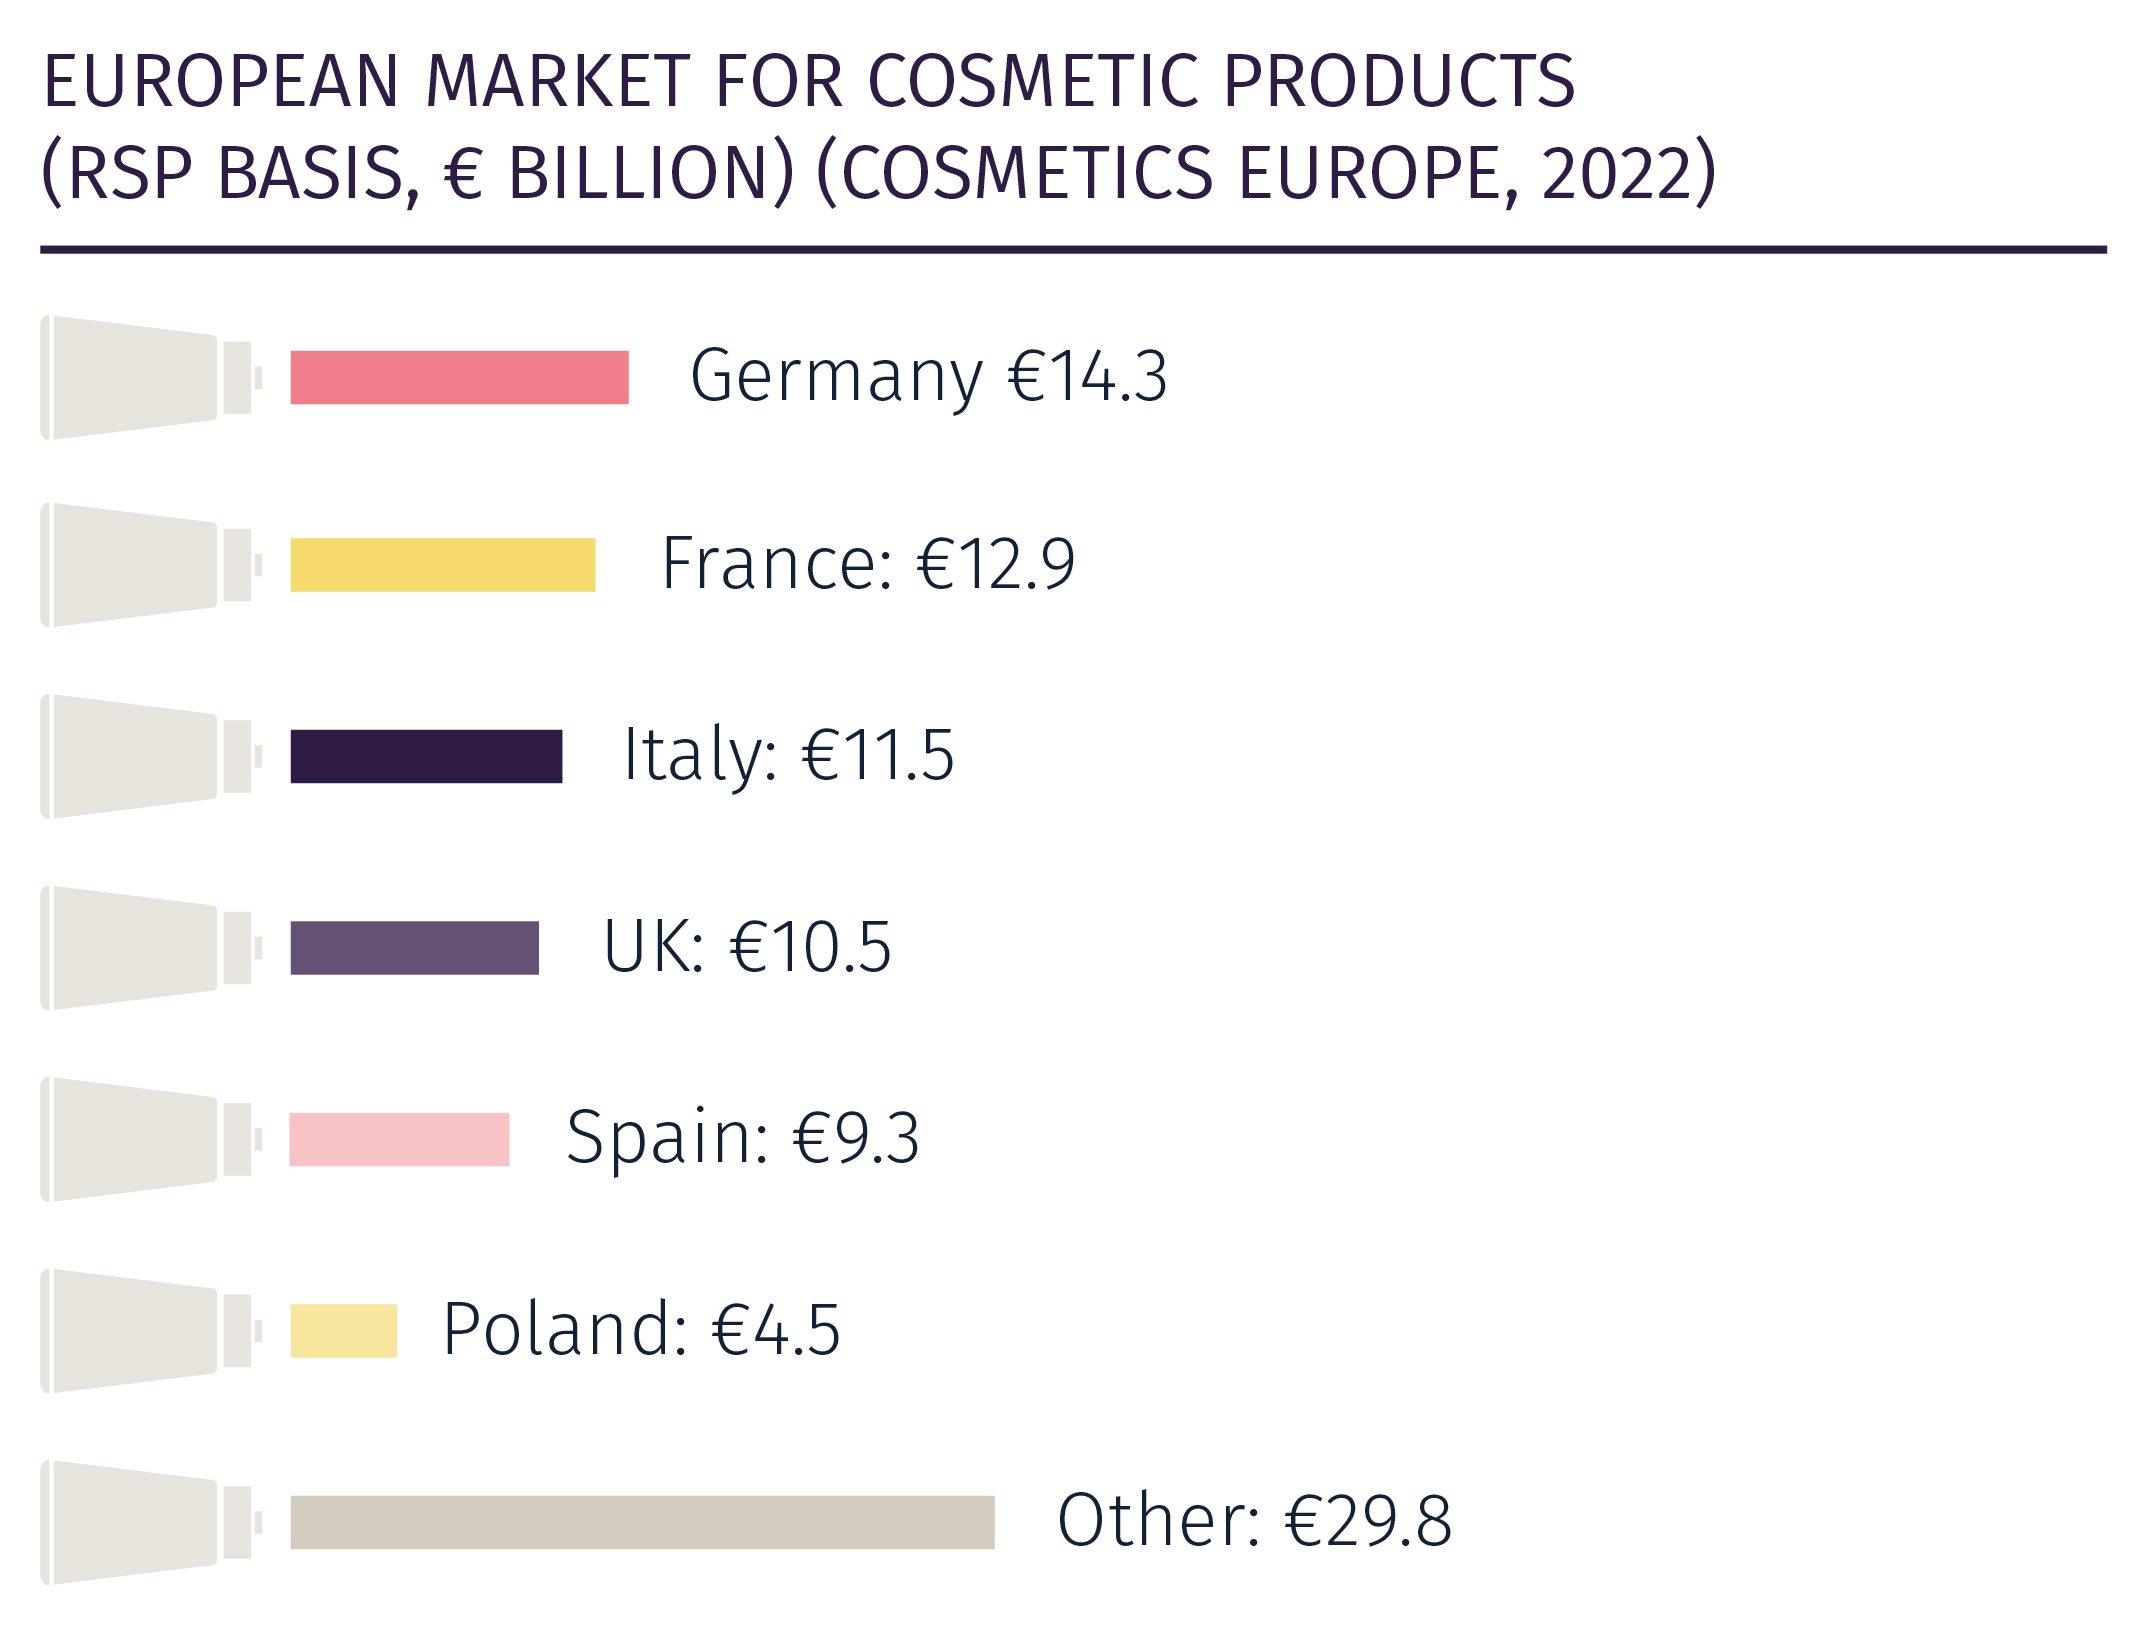 How Did The Top Two Beauty Companies Perform In The Makeup Segment Over The  Last Five Years?